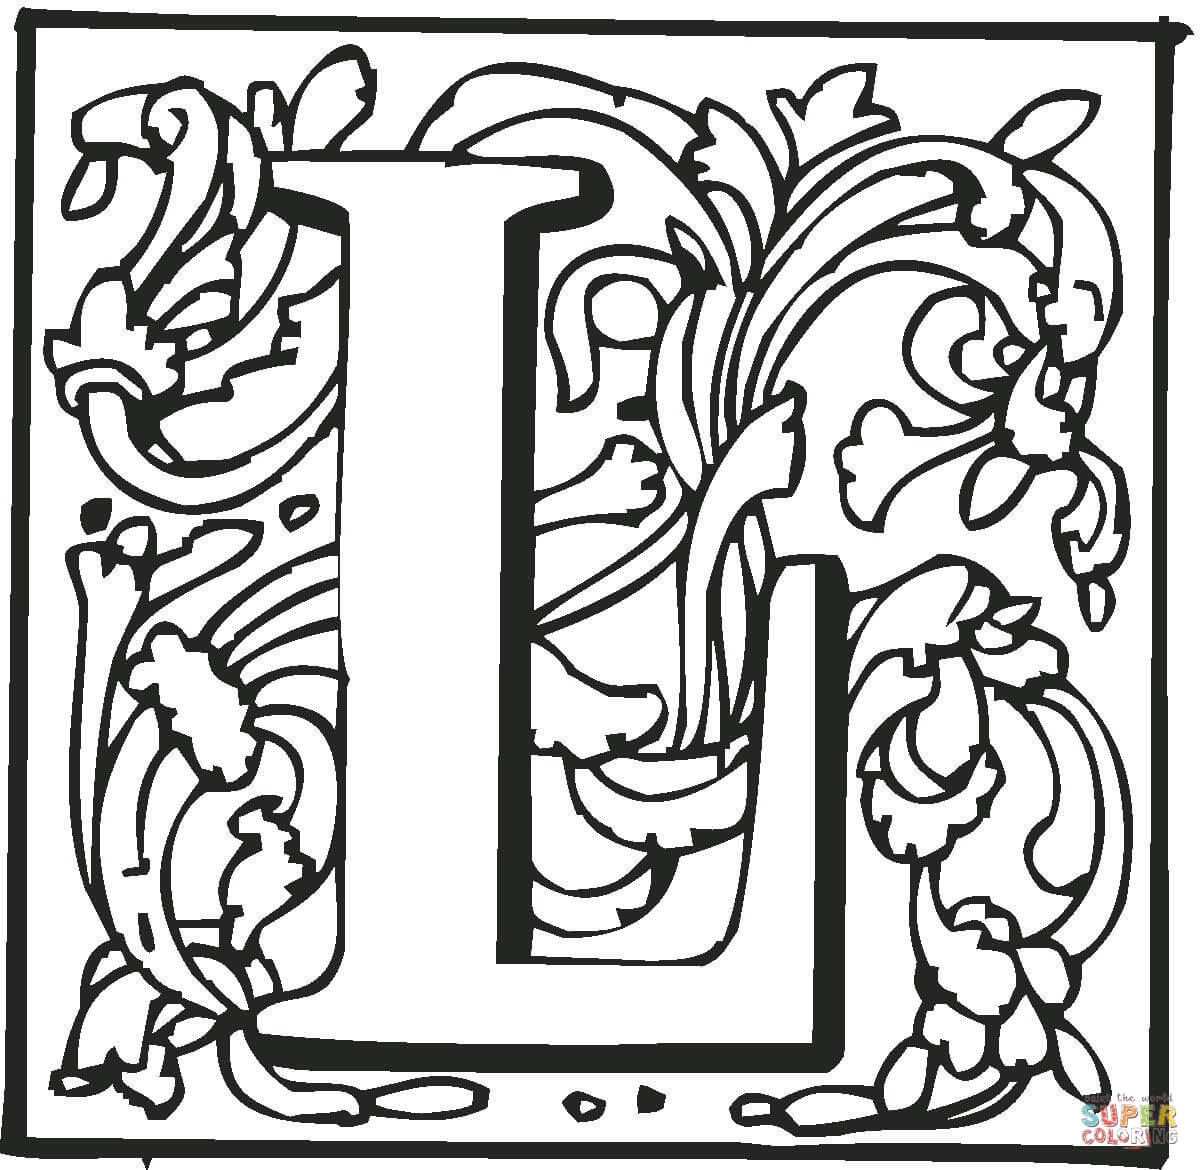 download-or-print-this-amazing-coloring-page-6-pics-of-letter-l